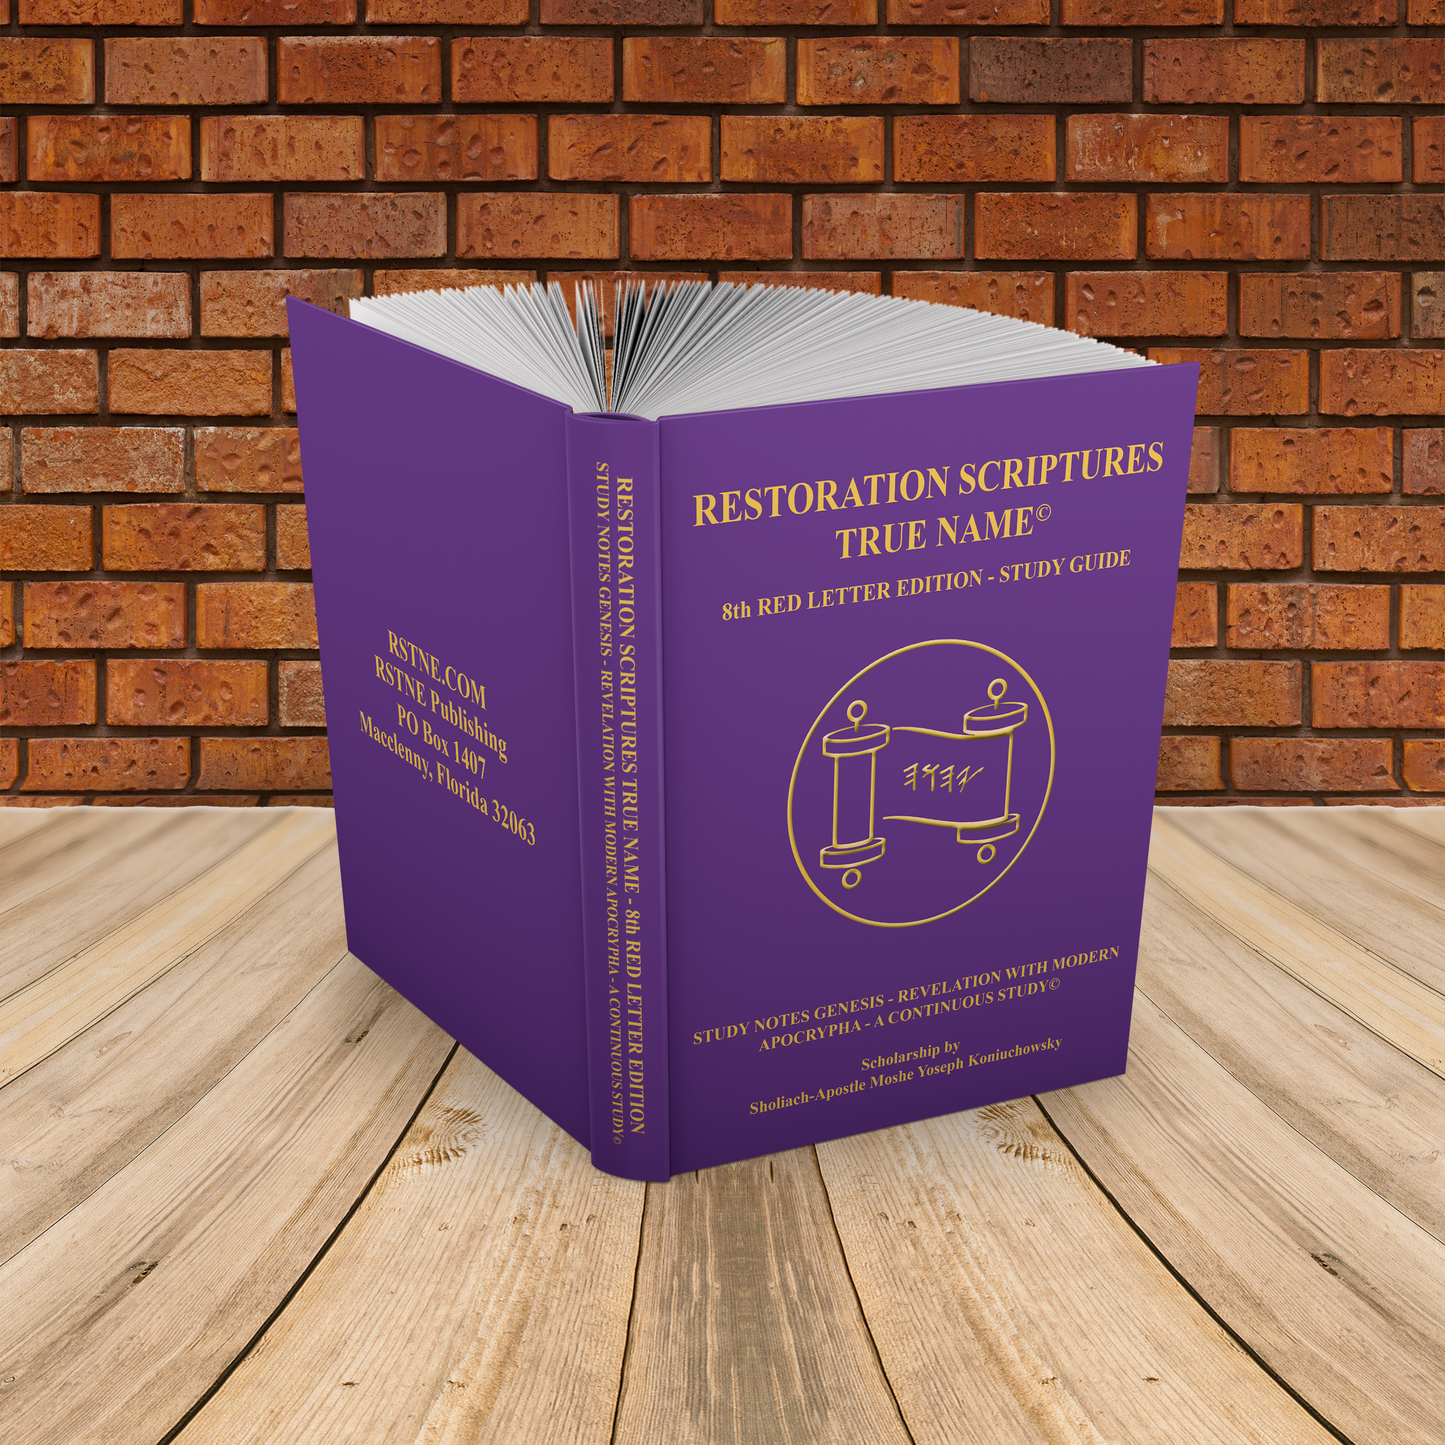 The Restoration Scriptures Eighth Edition Study Guide